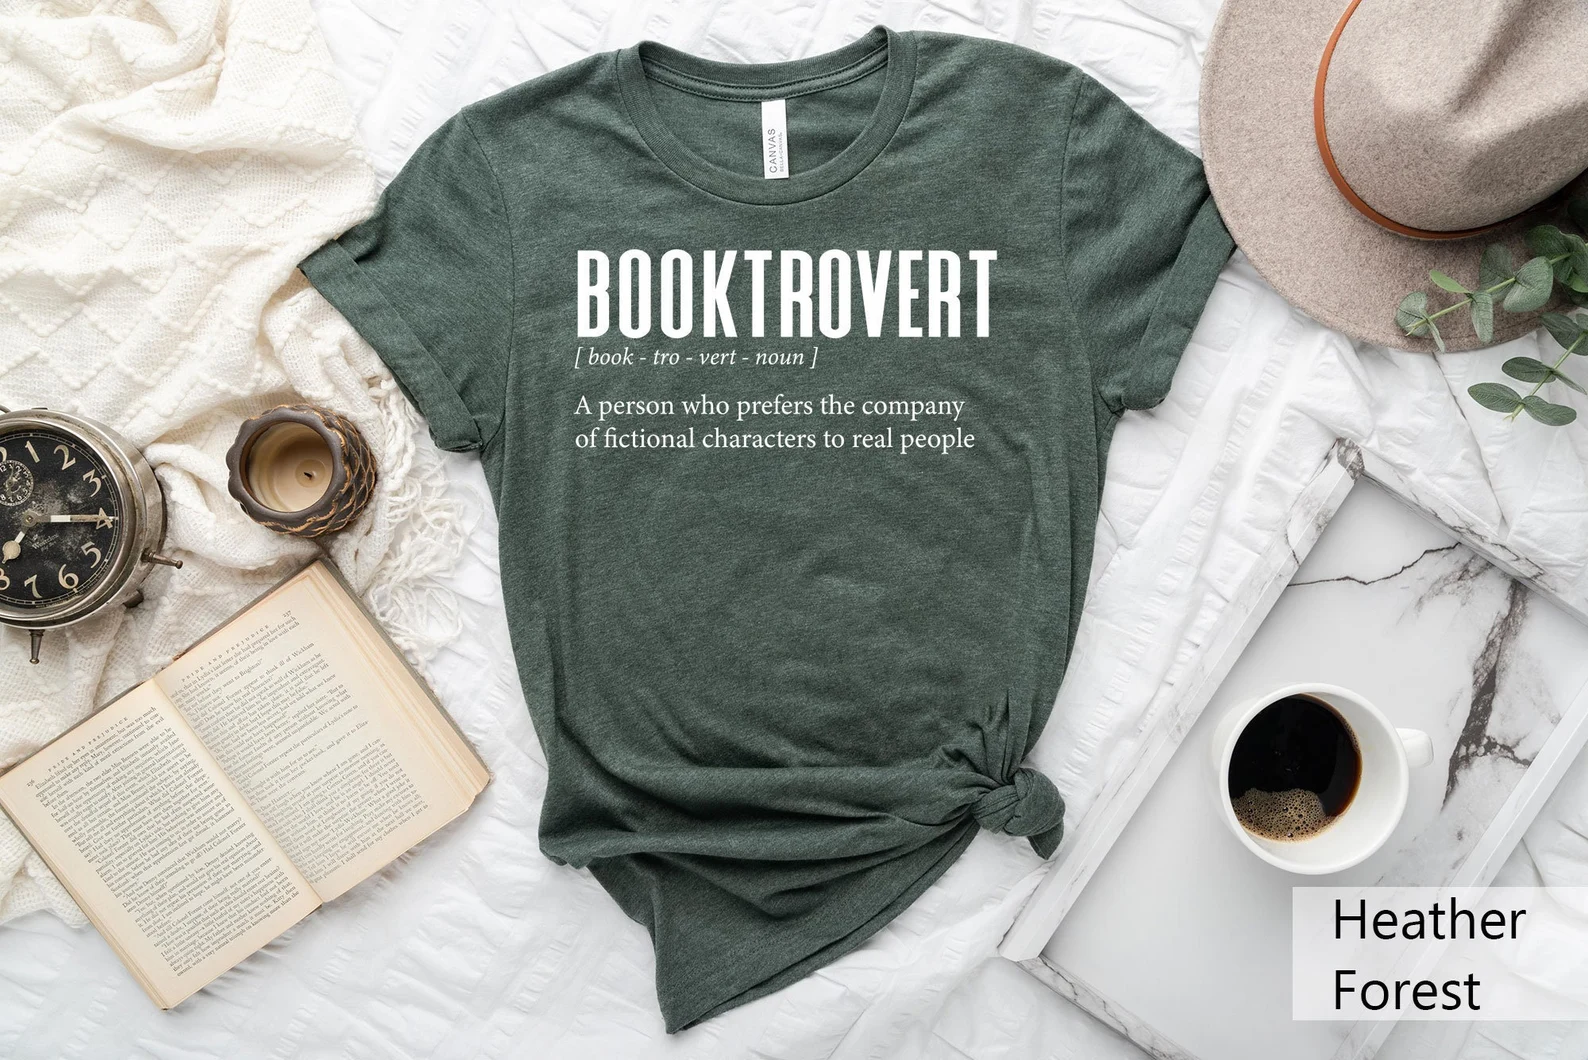 a green t-shirt that reads "Book trovert: a person who prefers the company of fictional characters to people"